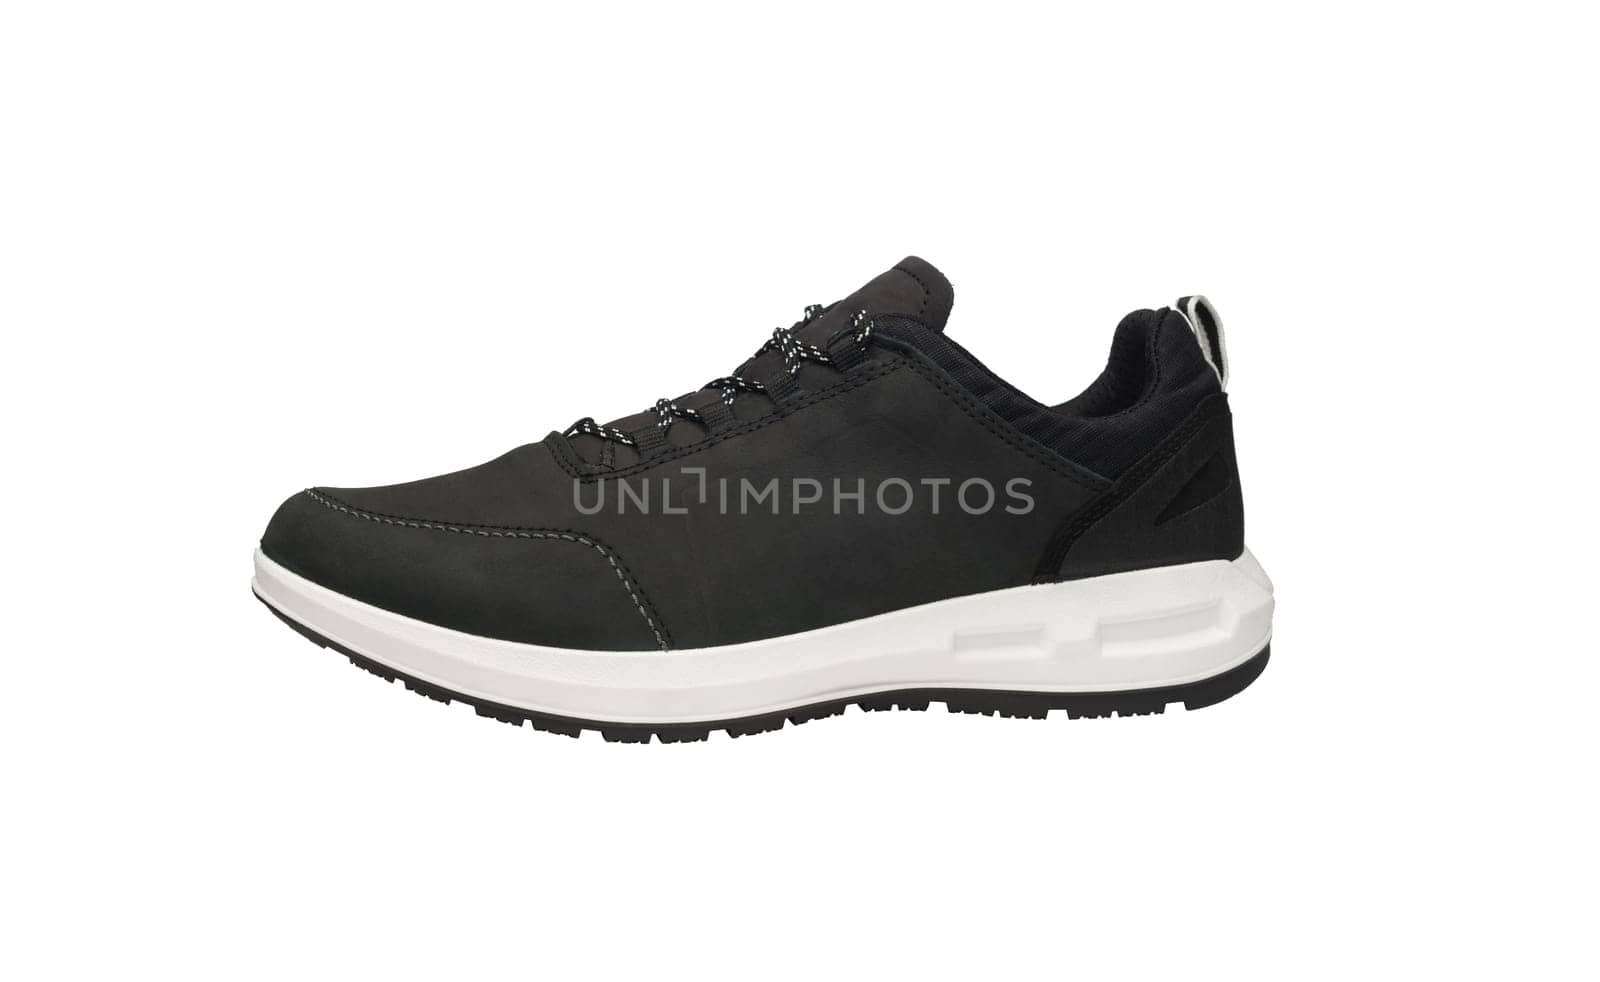 New running sneaker in cold weather isolated on white background. Men sport footwear for everyday use. Athletic unbranded workout gym shoes with white sole. Modern black leather trainers for training